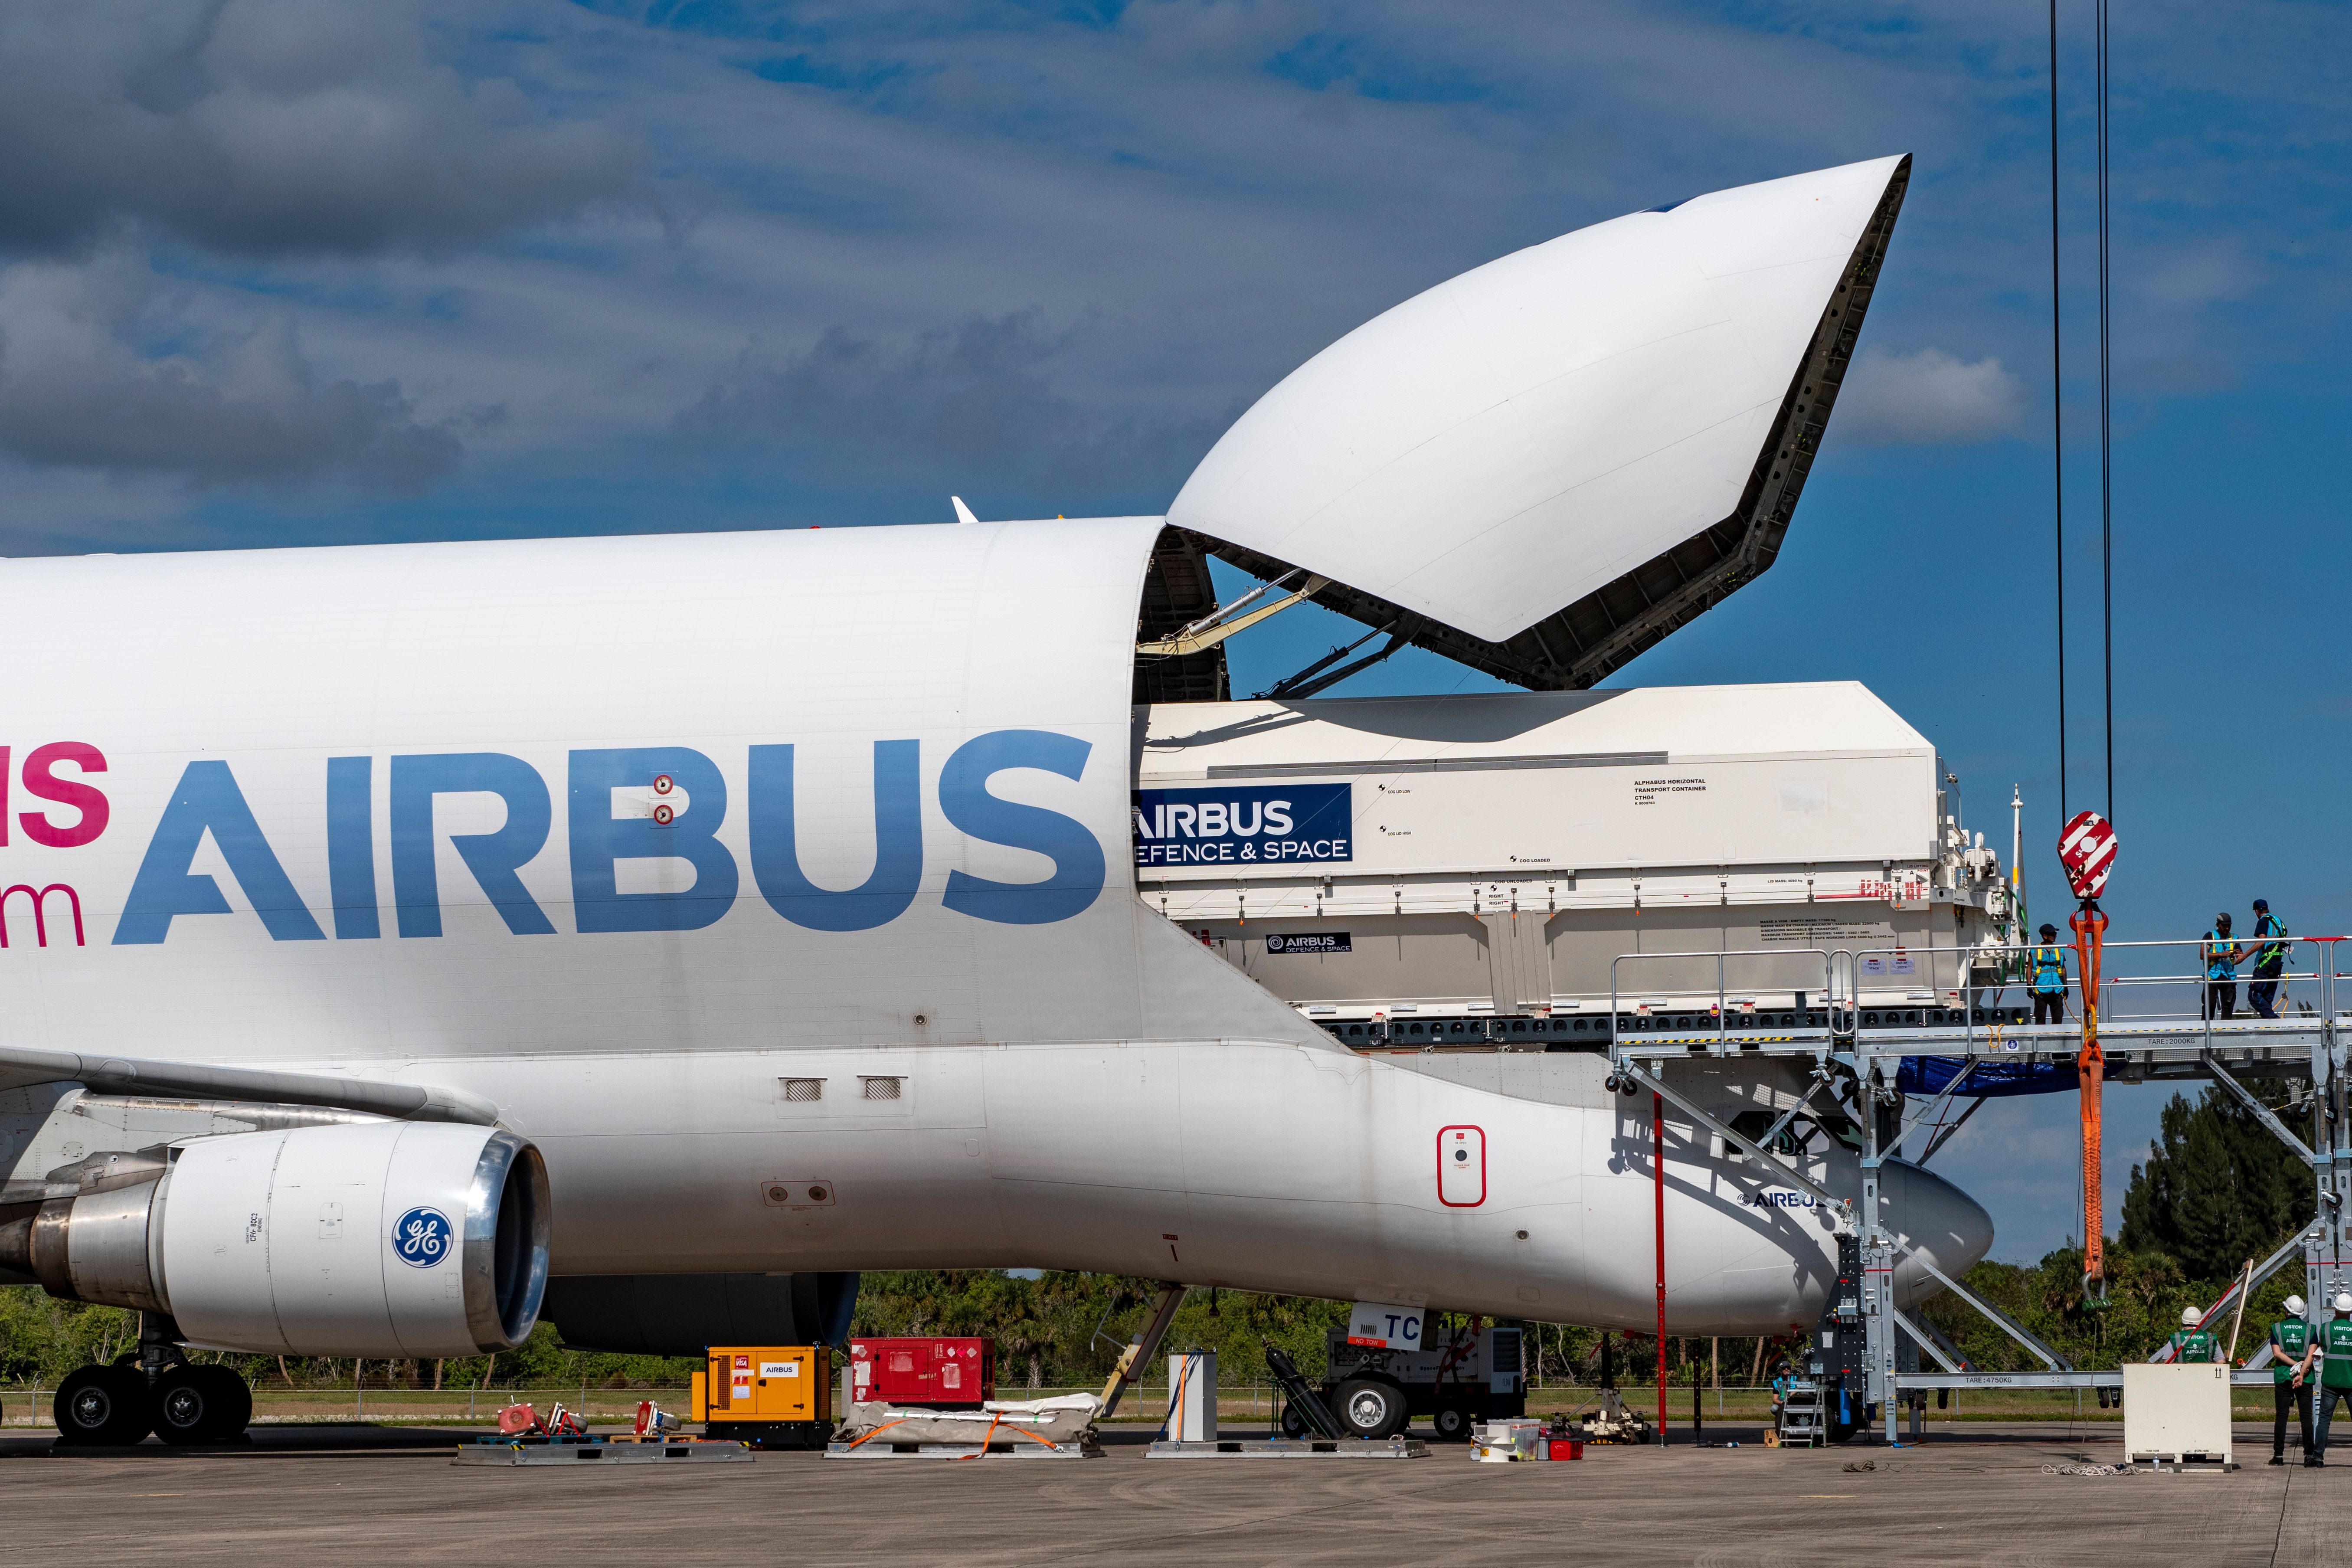 A Satellite vessel being unloaded from an Airbus Beluga XL aircraft.